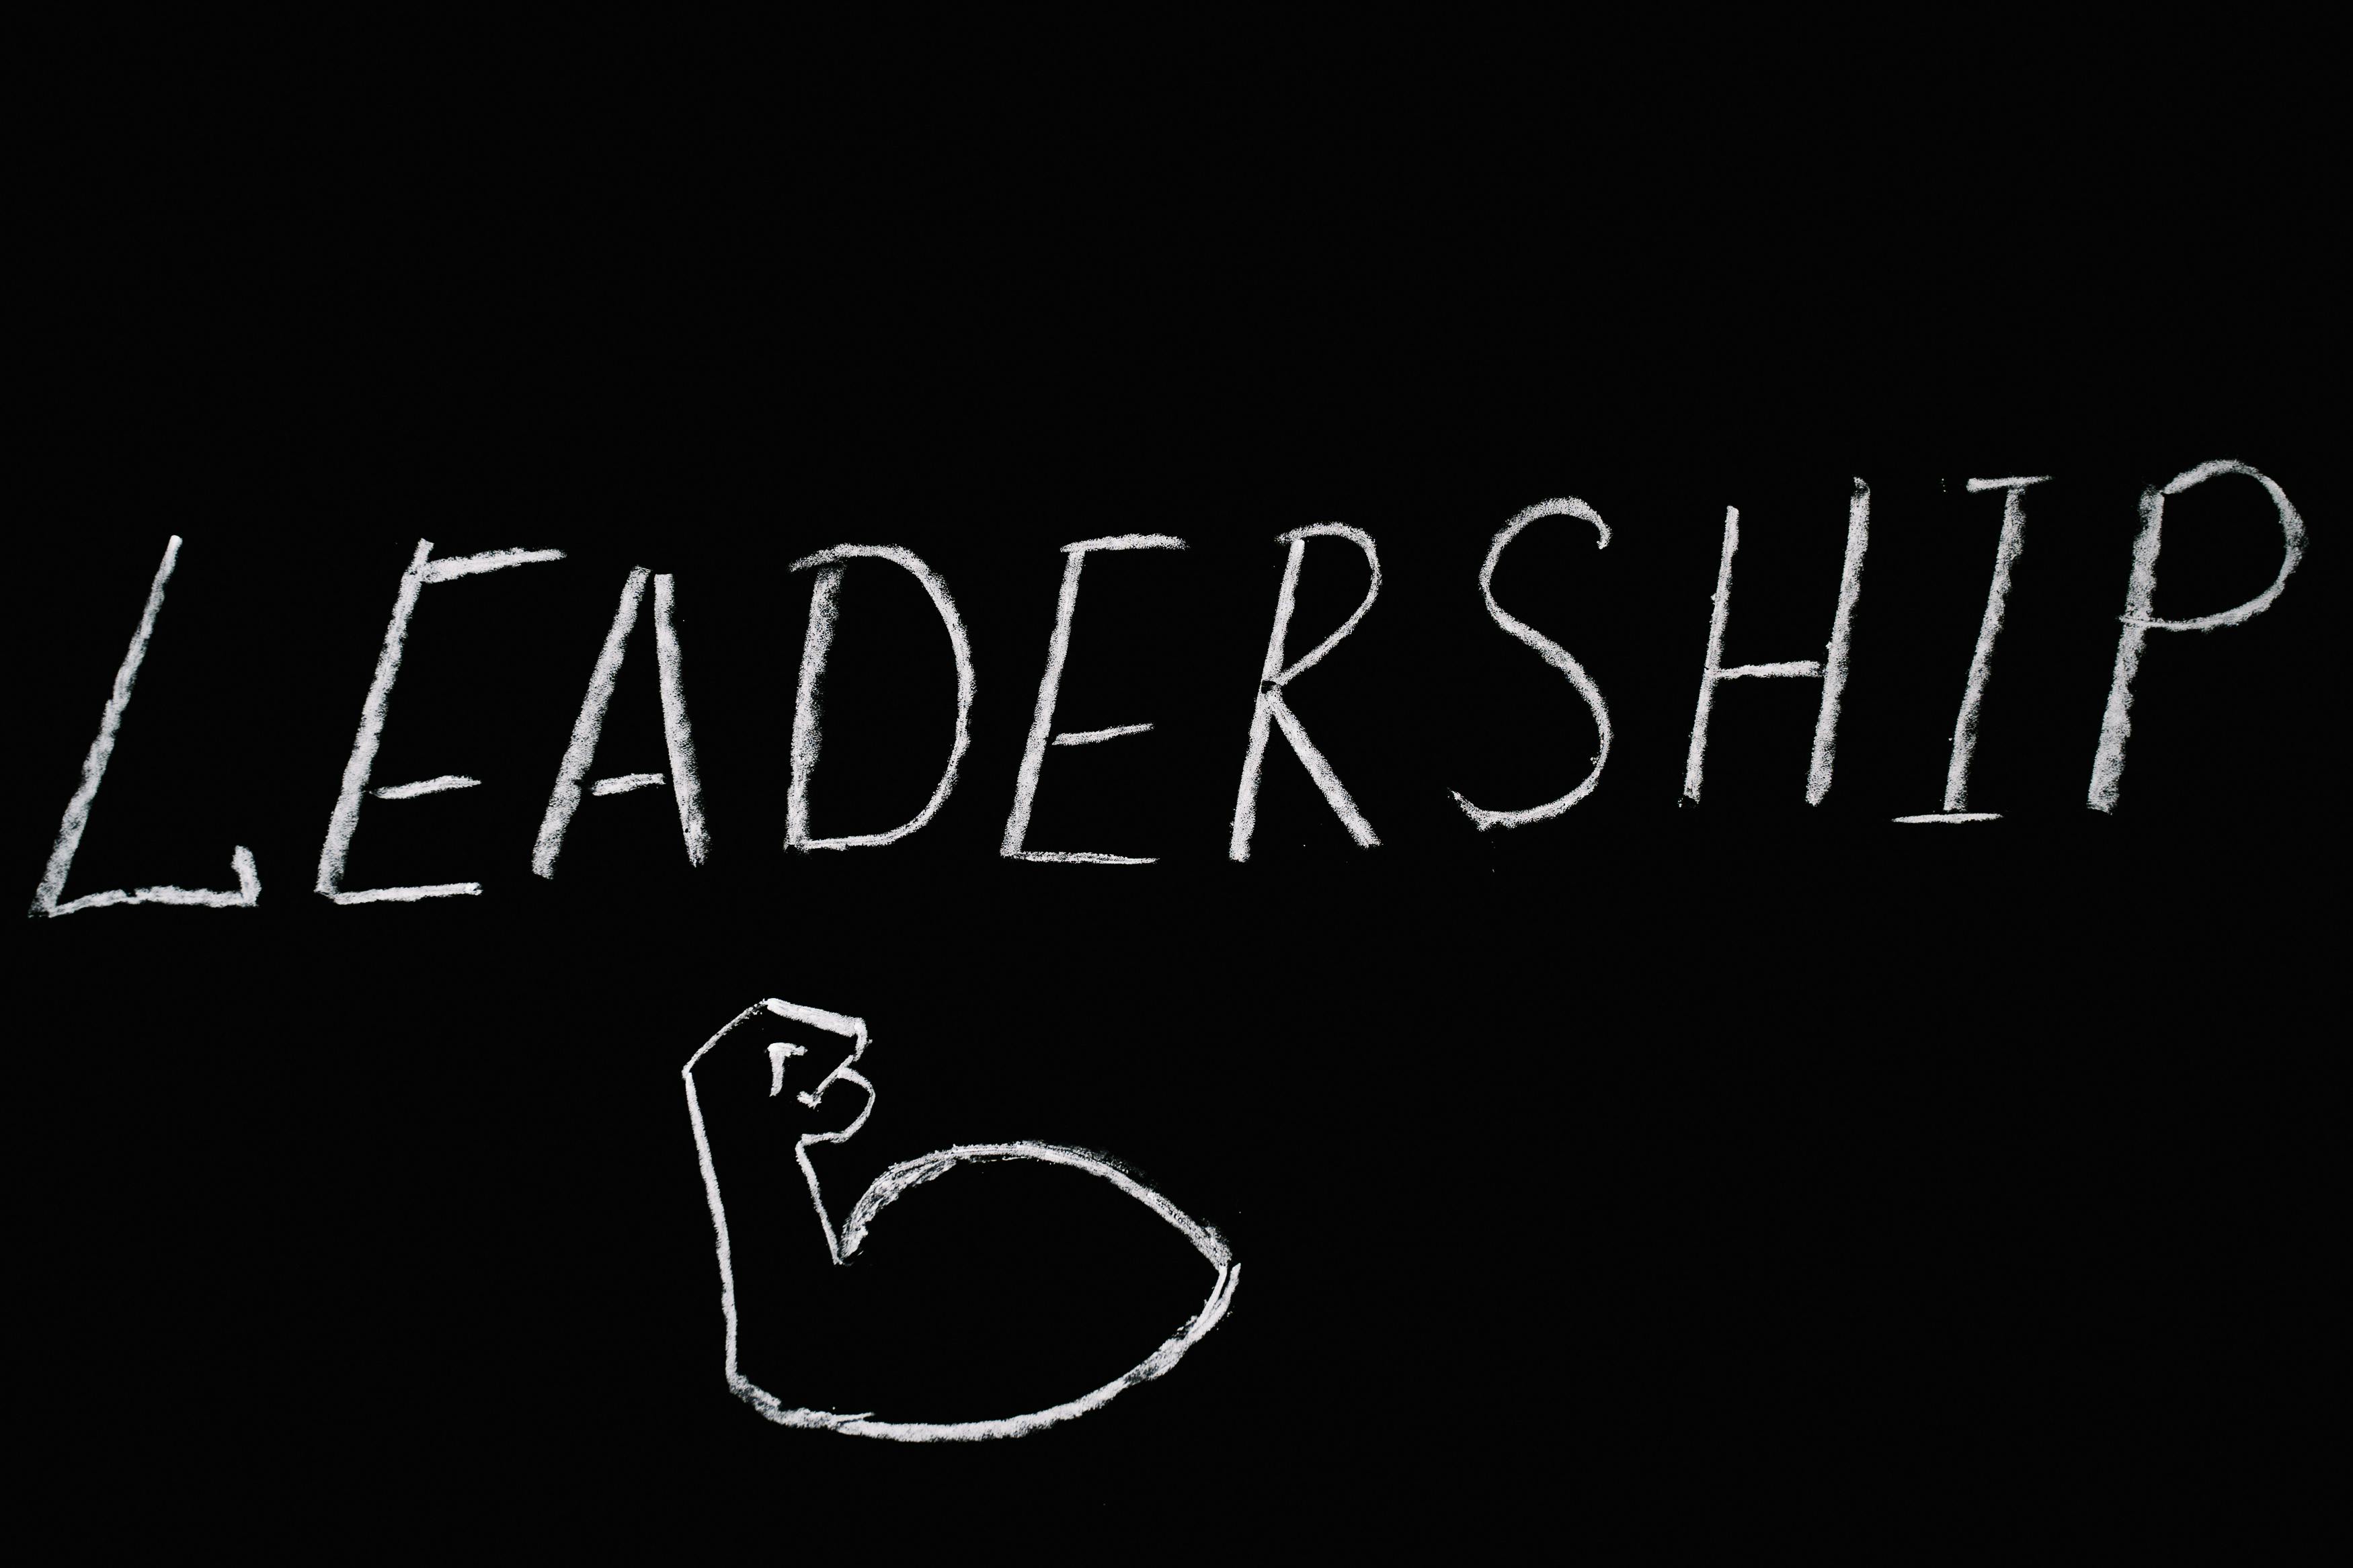 leadership lettering text on black background